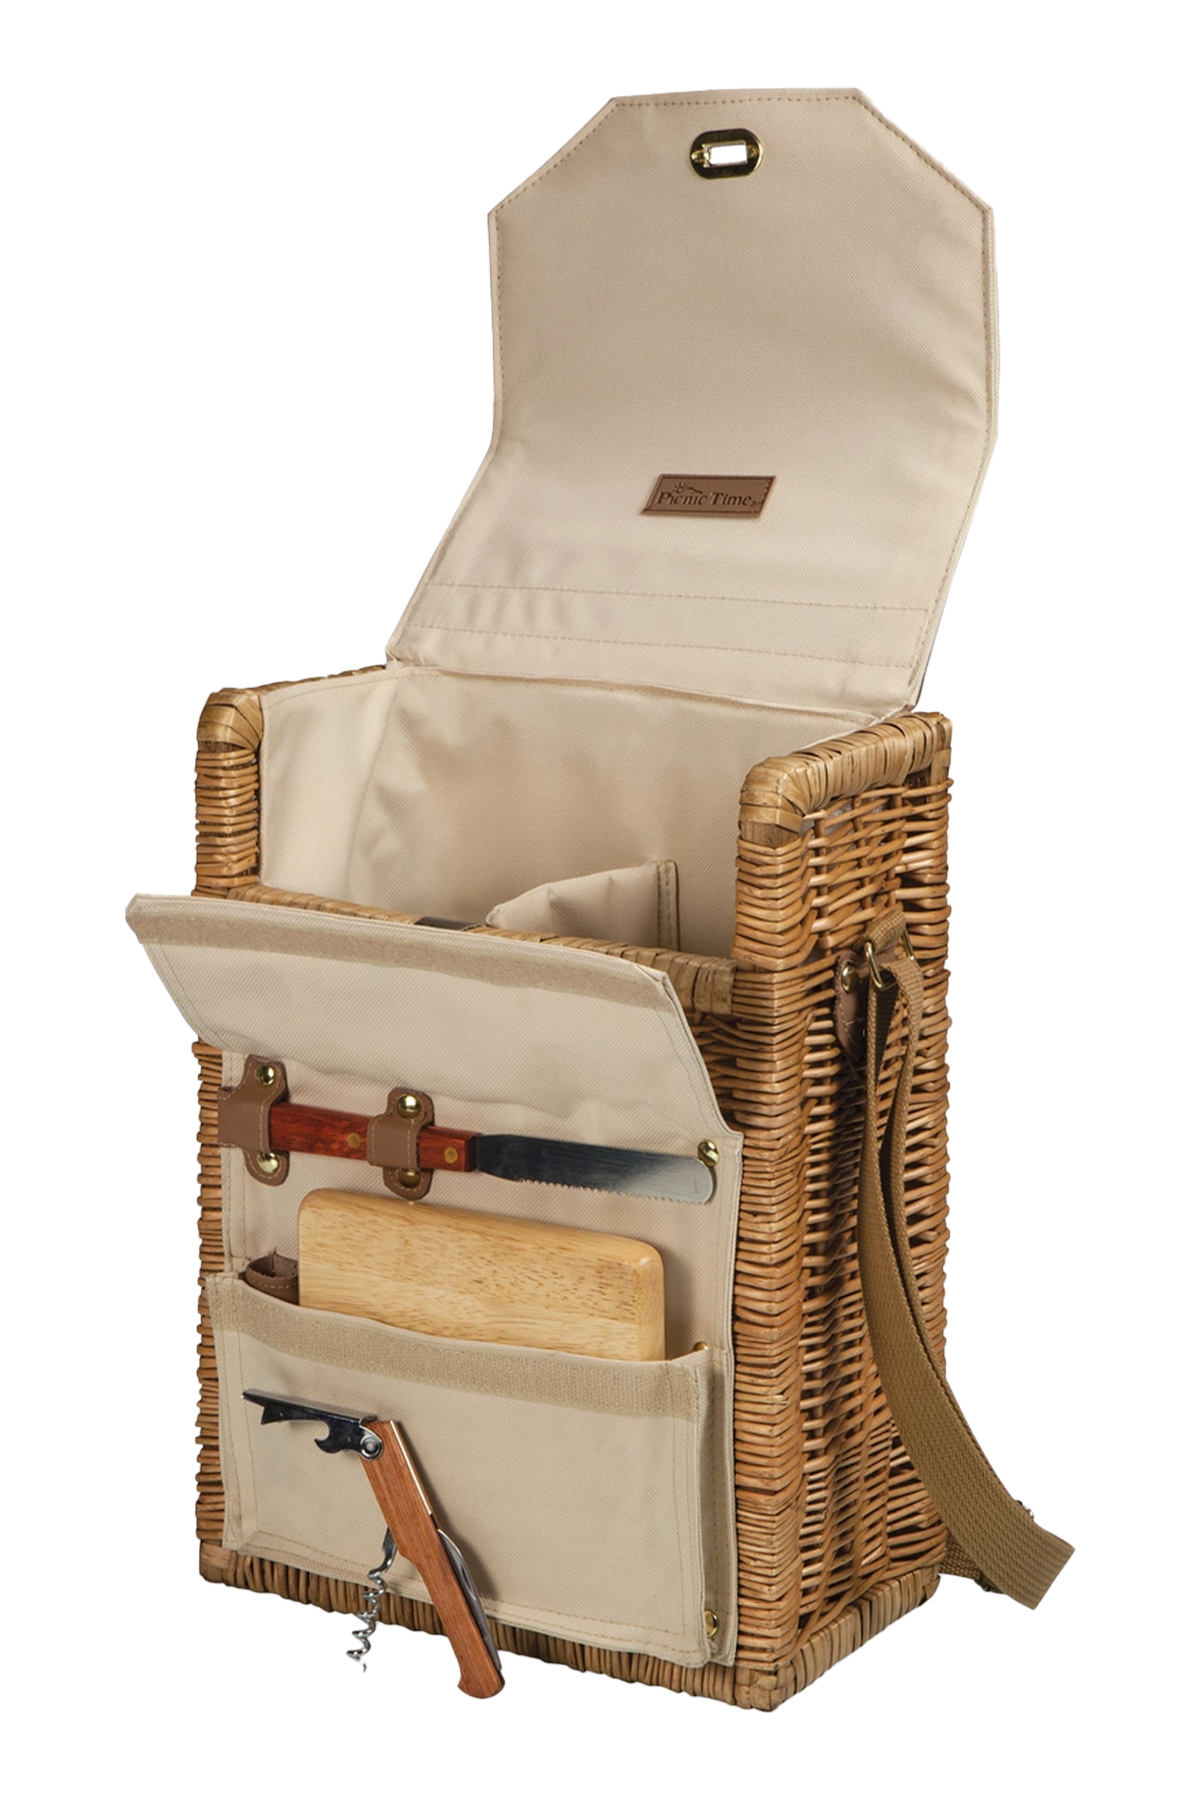 corsica wine cheese picnic basket from dlm supply